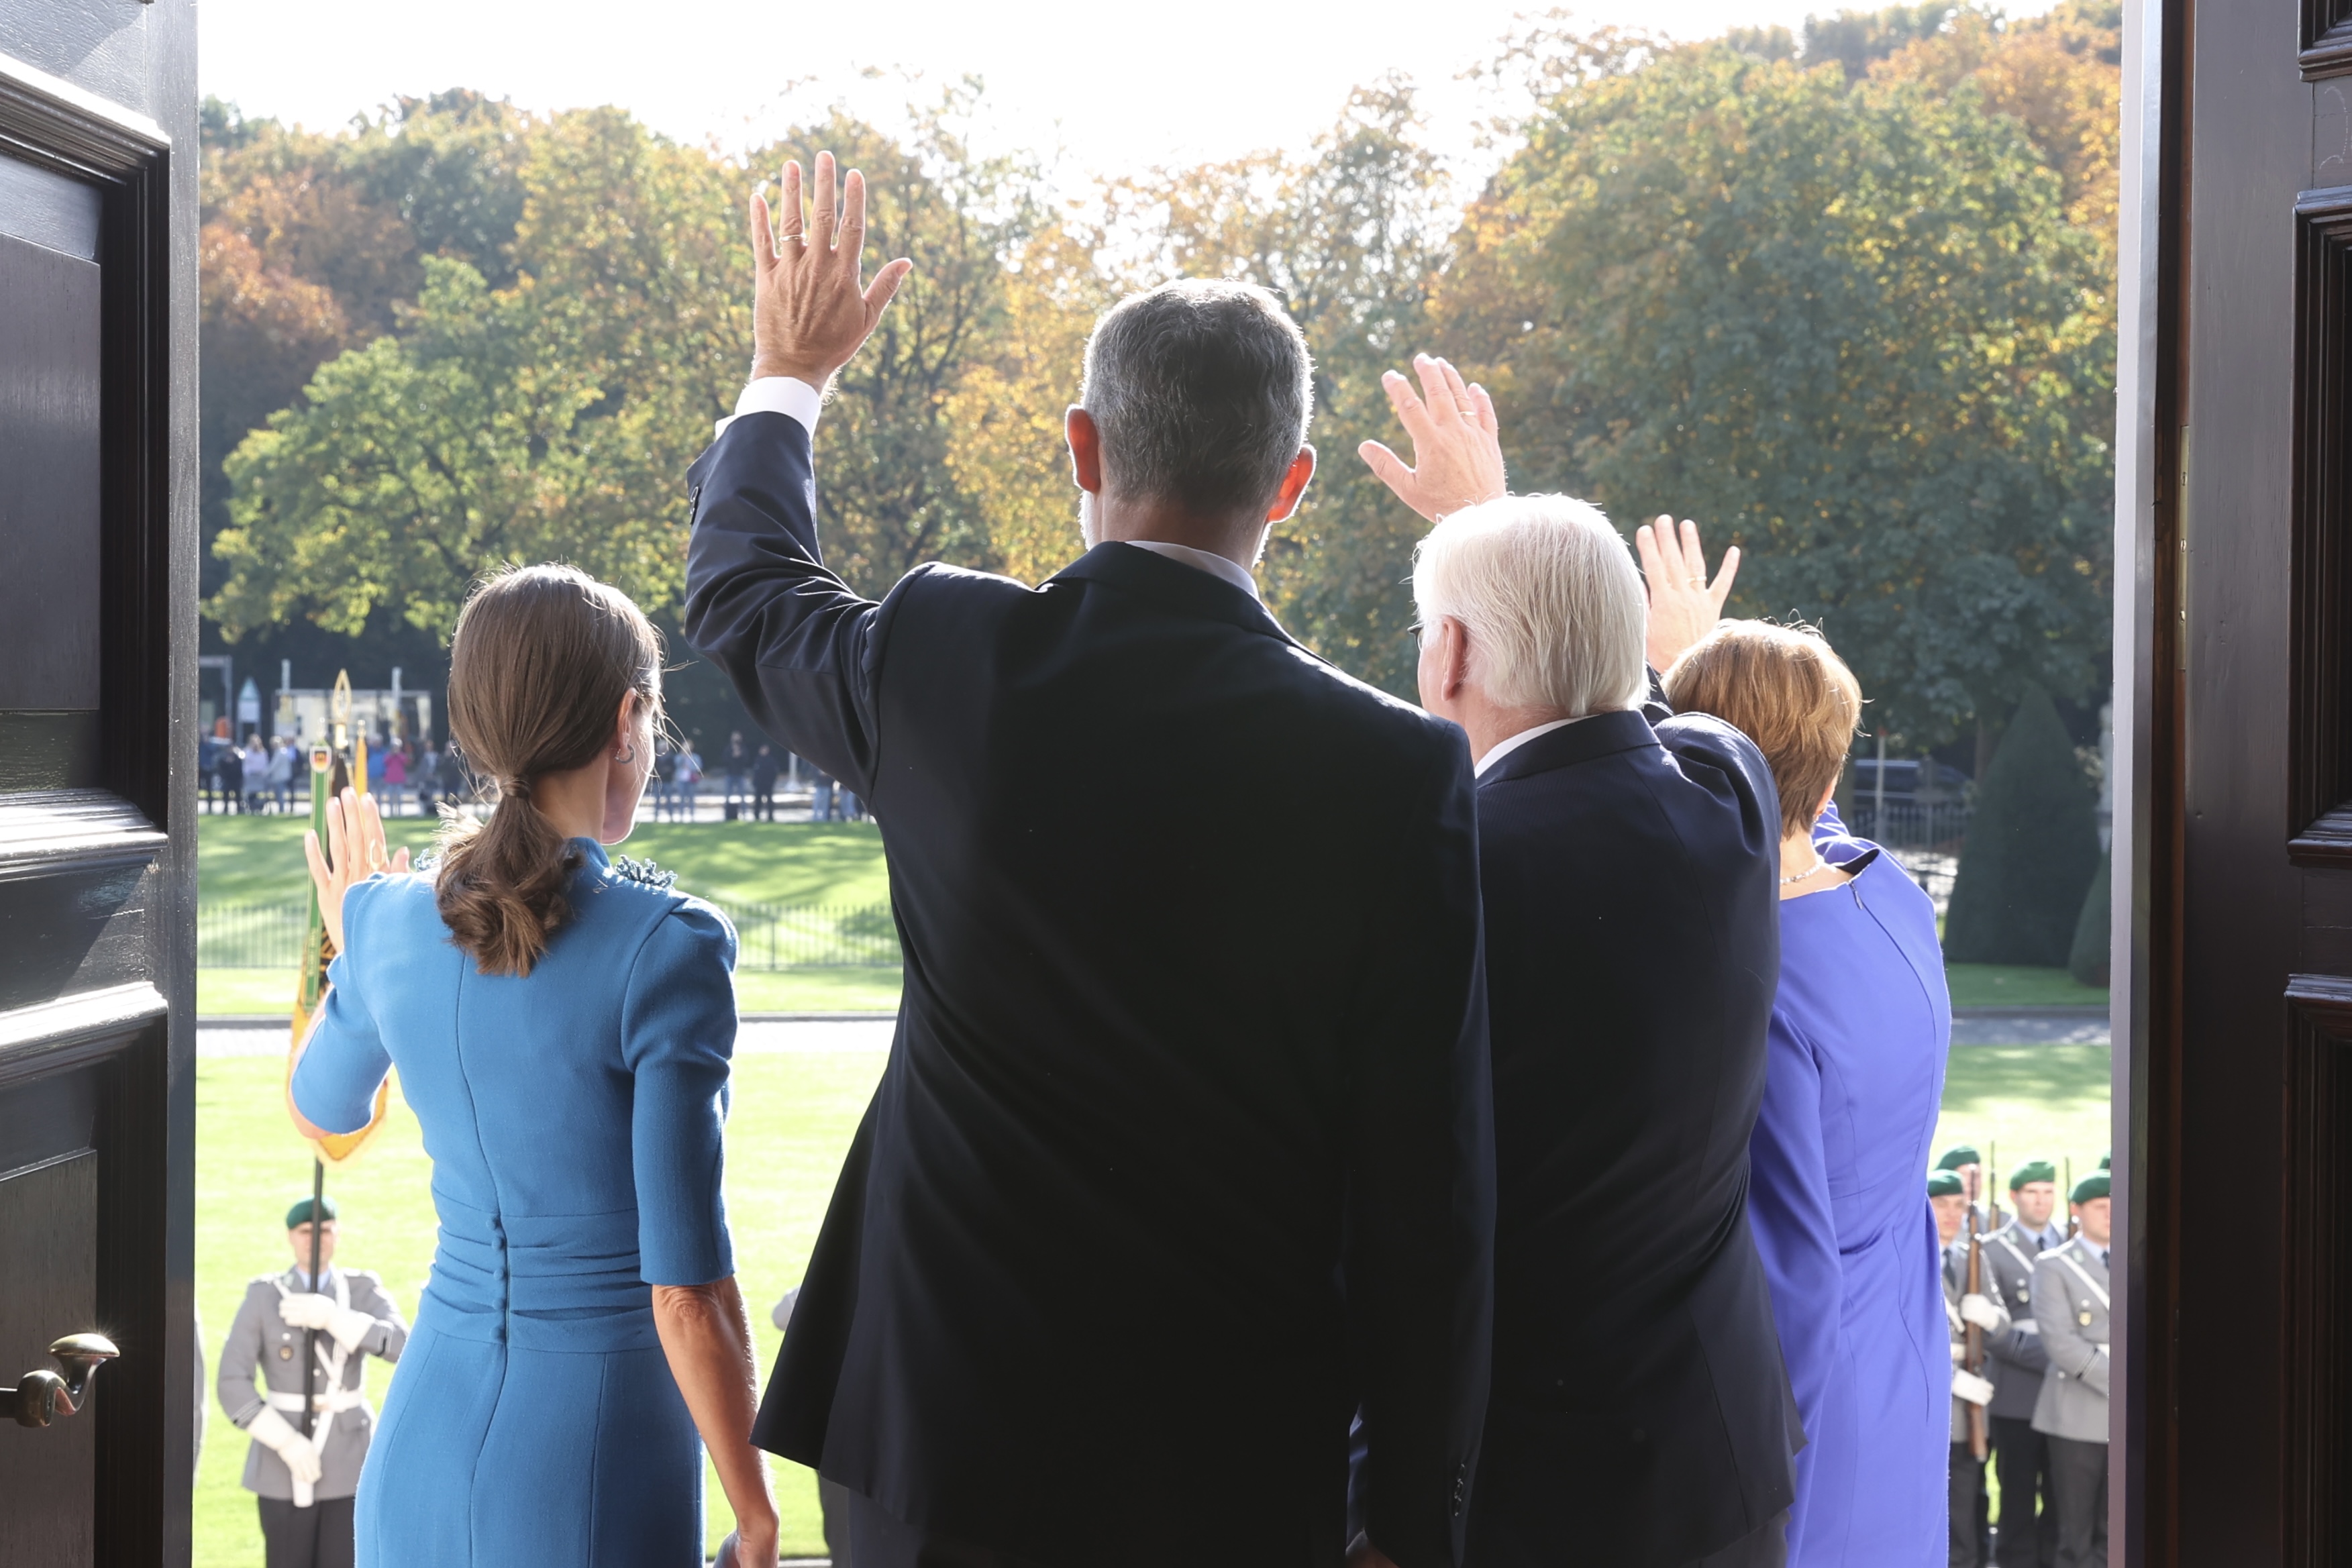 The President and First Lady of Germany, Frank-Walter Steinmeier and Elke Büdenbender, officially welcomed King Felipe and Queen Letizia of Spain at the Bellevue Palace in Berlin with Military Honours.